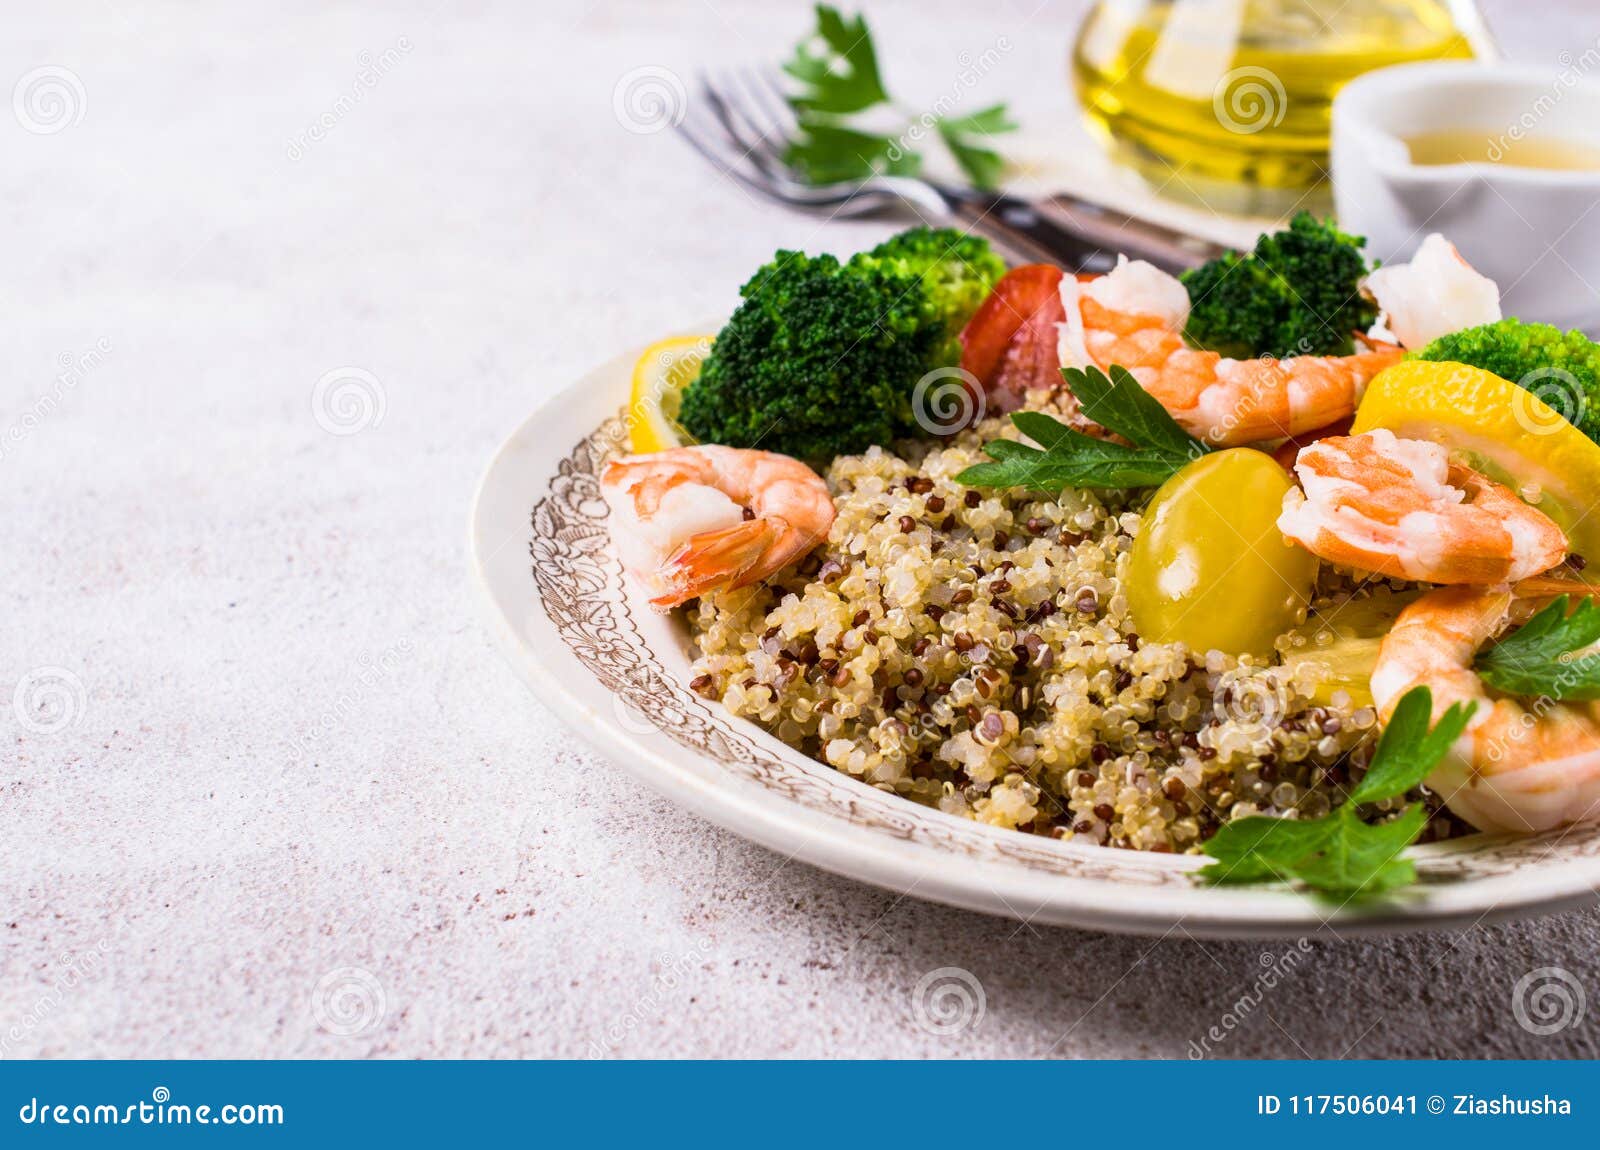 Quinoa Salad with Vegetables Stock Image - Image of dish, mustard ...